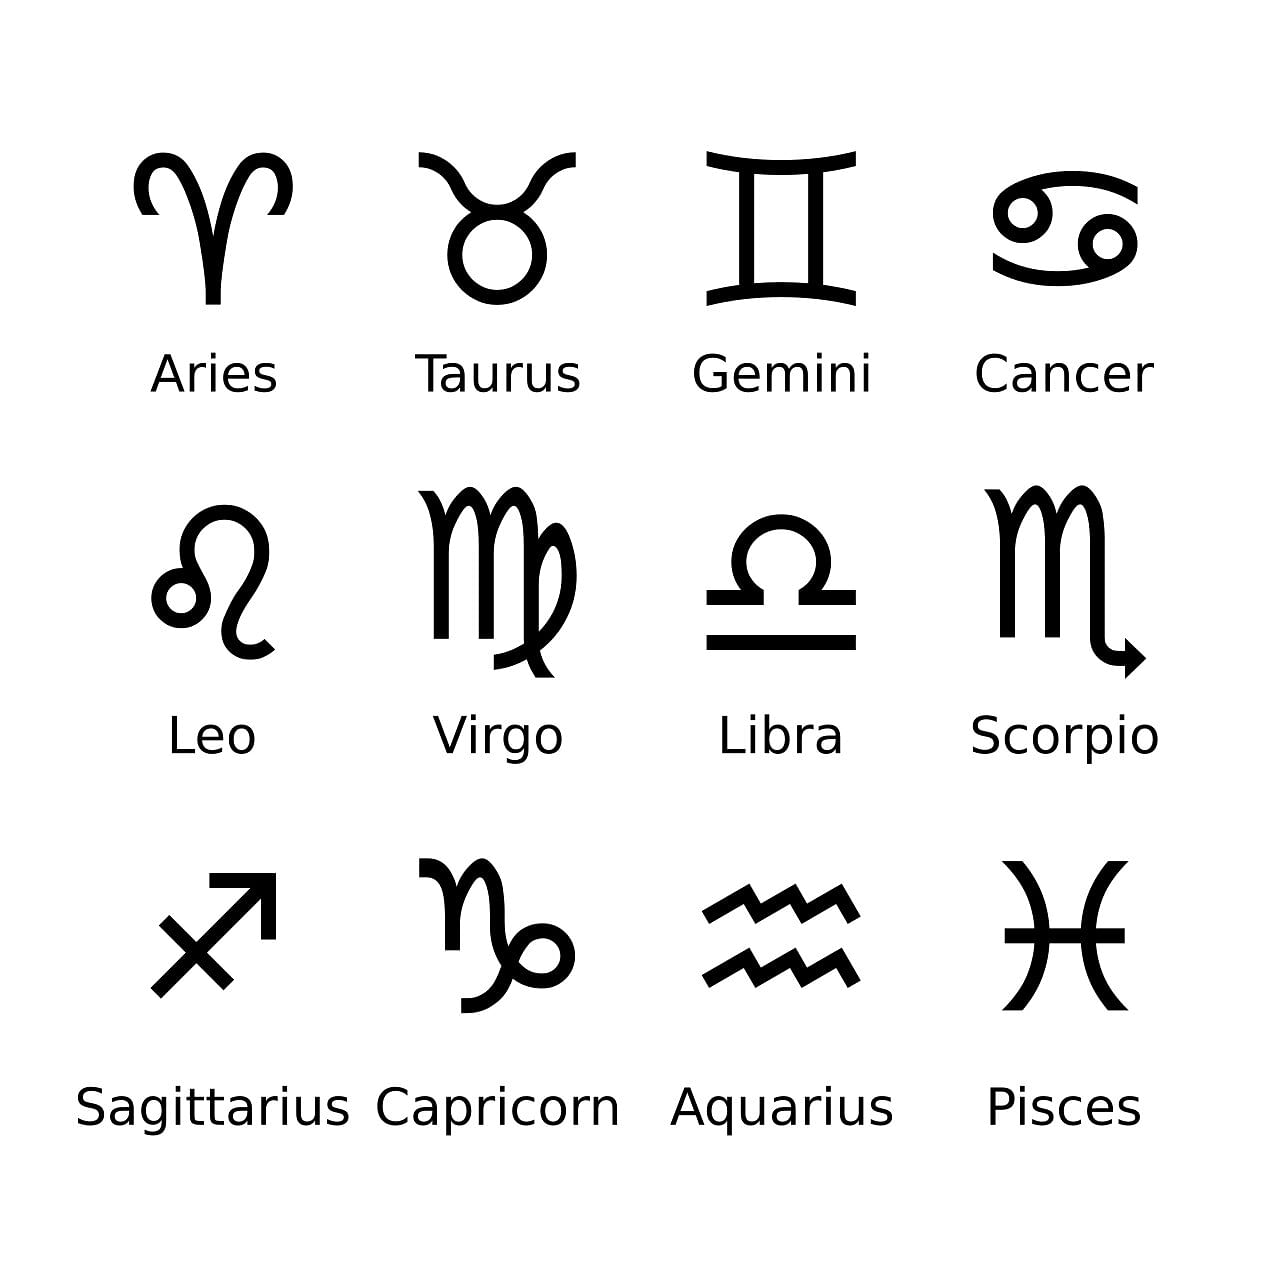 The cause of disease and the secret of good health are hidden in the zodiac signs